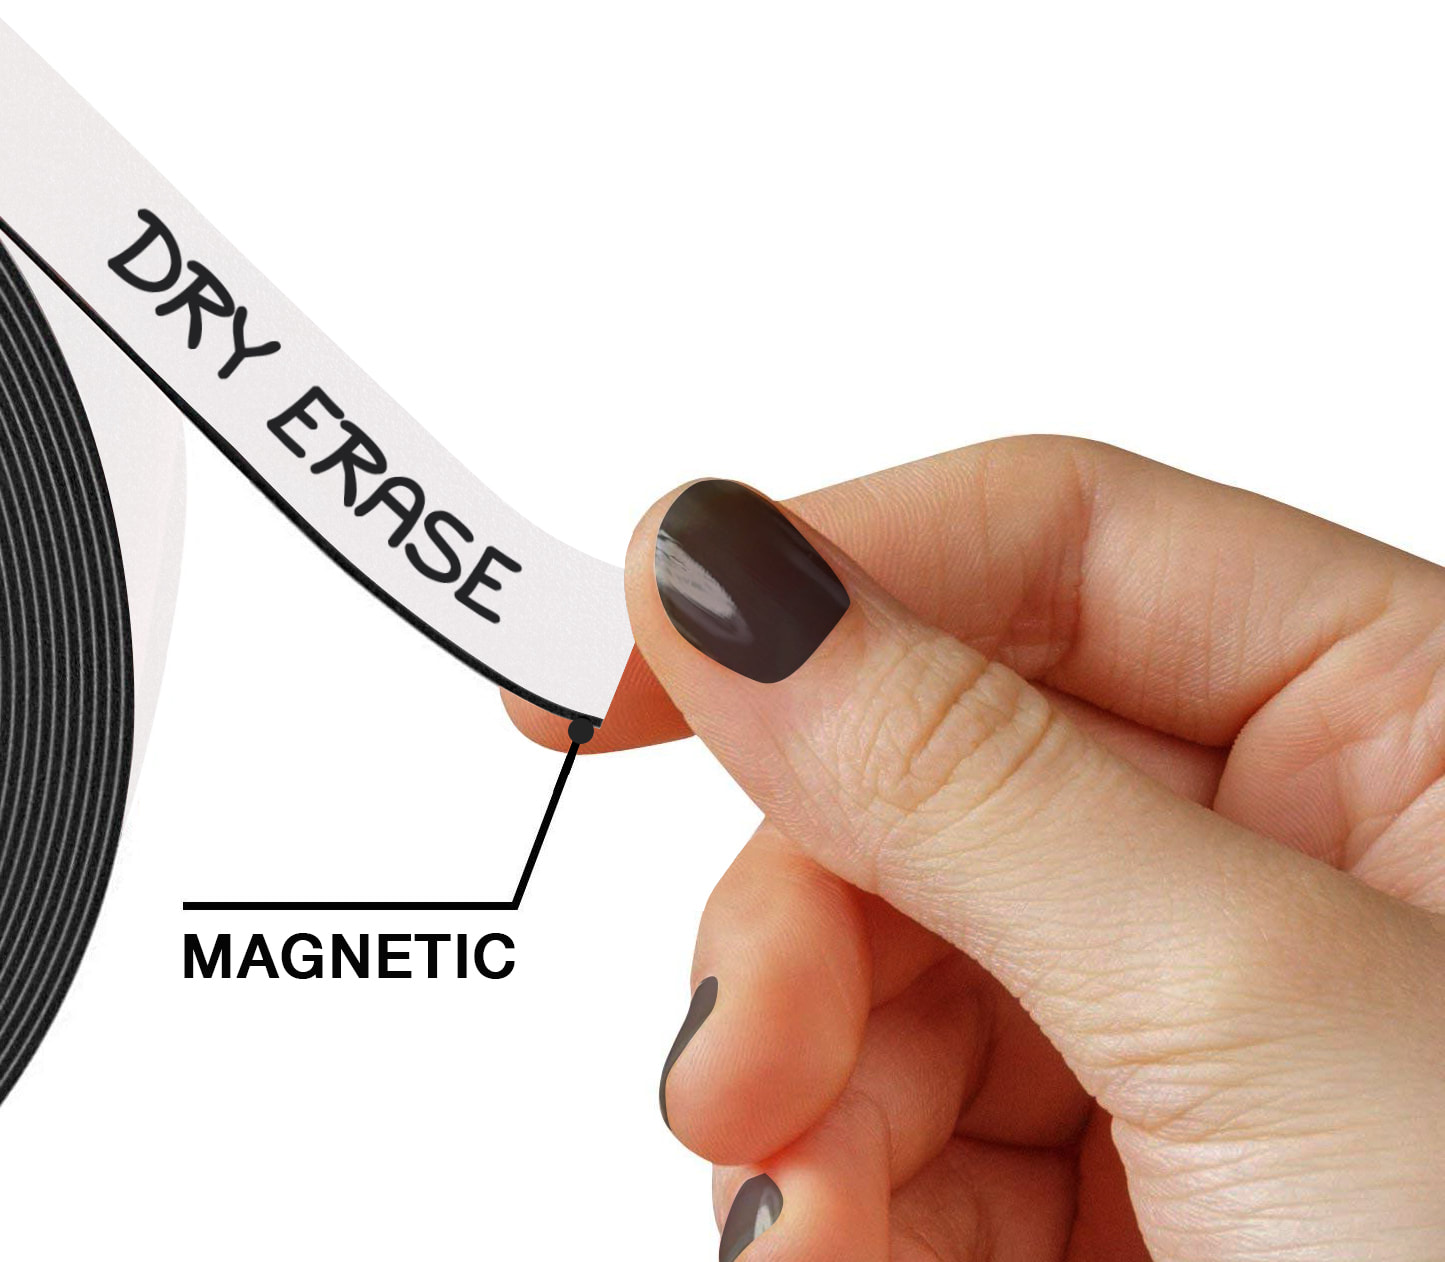 Write-On Magnetic Strip